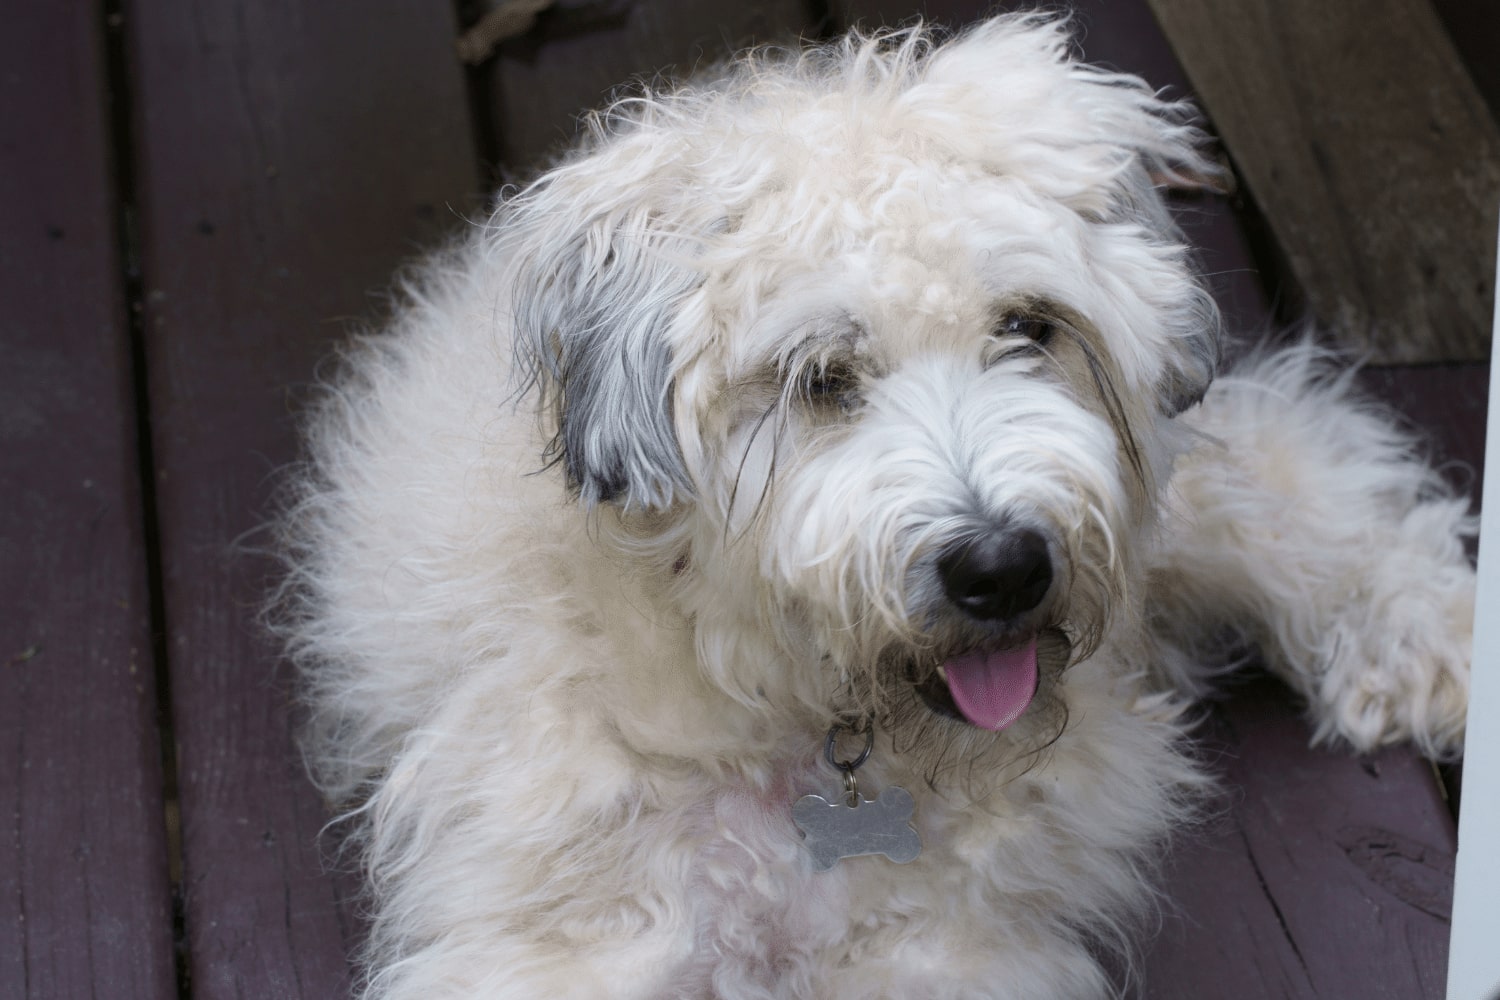 Dylan the Soft Coated Wheaten Terrier